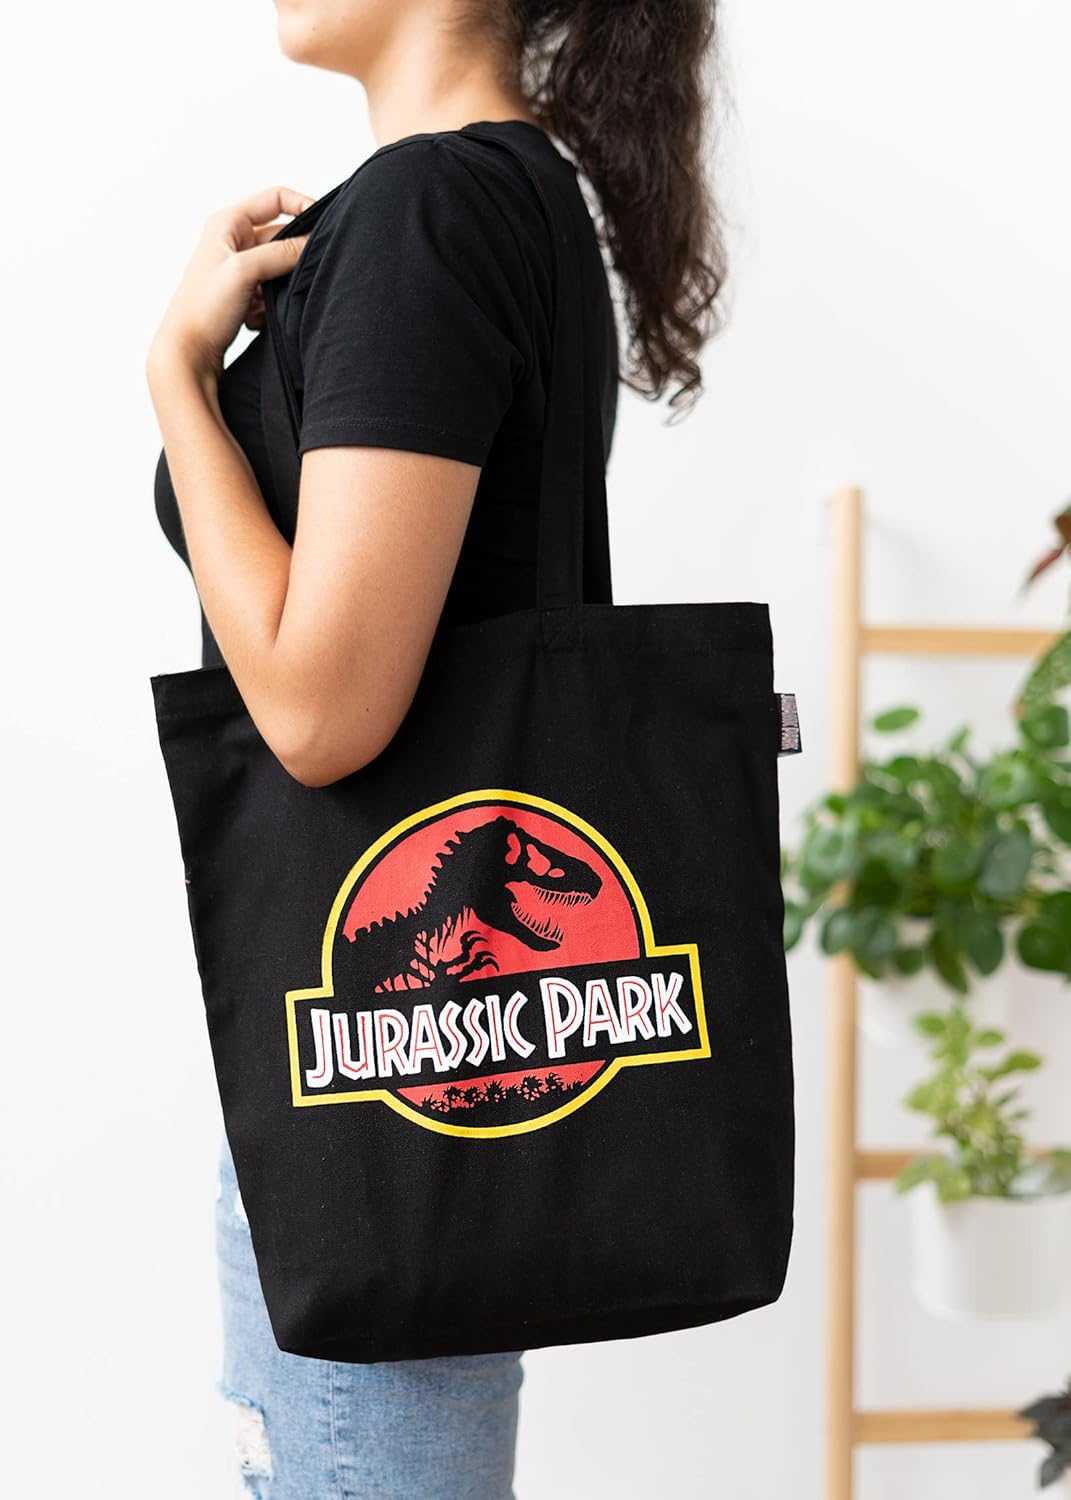 Official Jurassic Park Cotton Tote Bag - Cotton Shopping Bag - 14x15x4 inches |